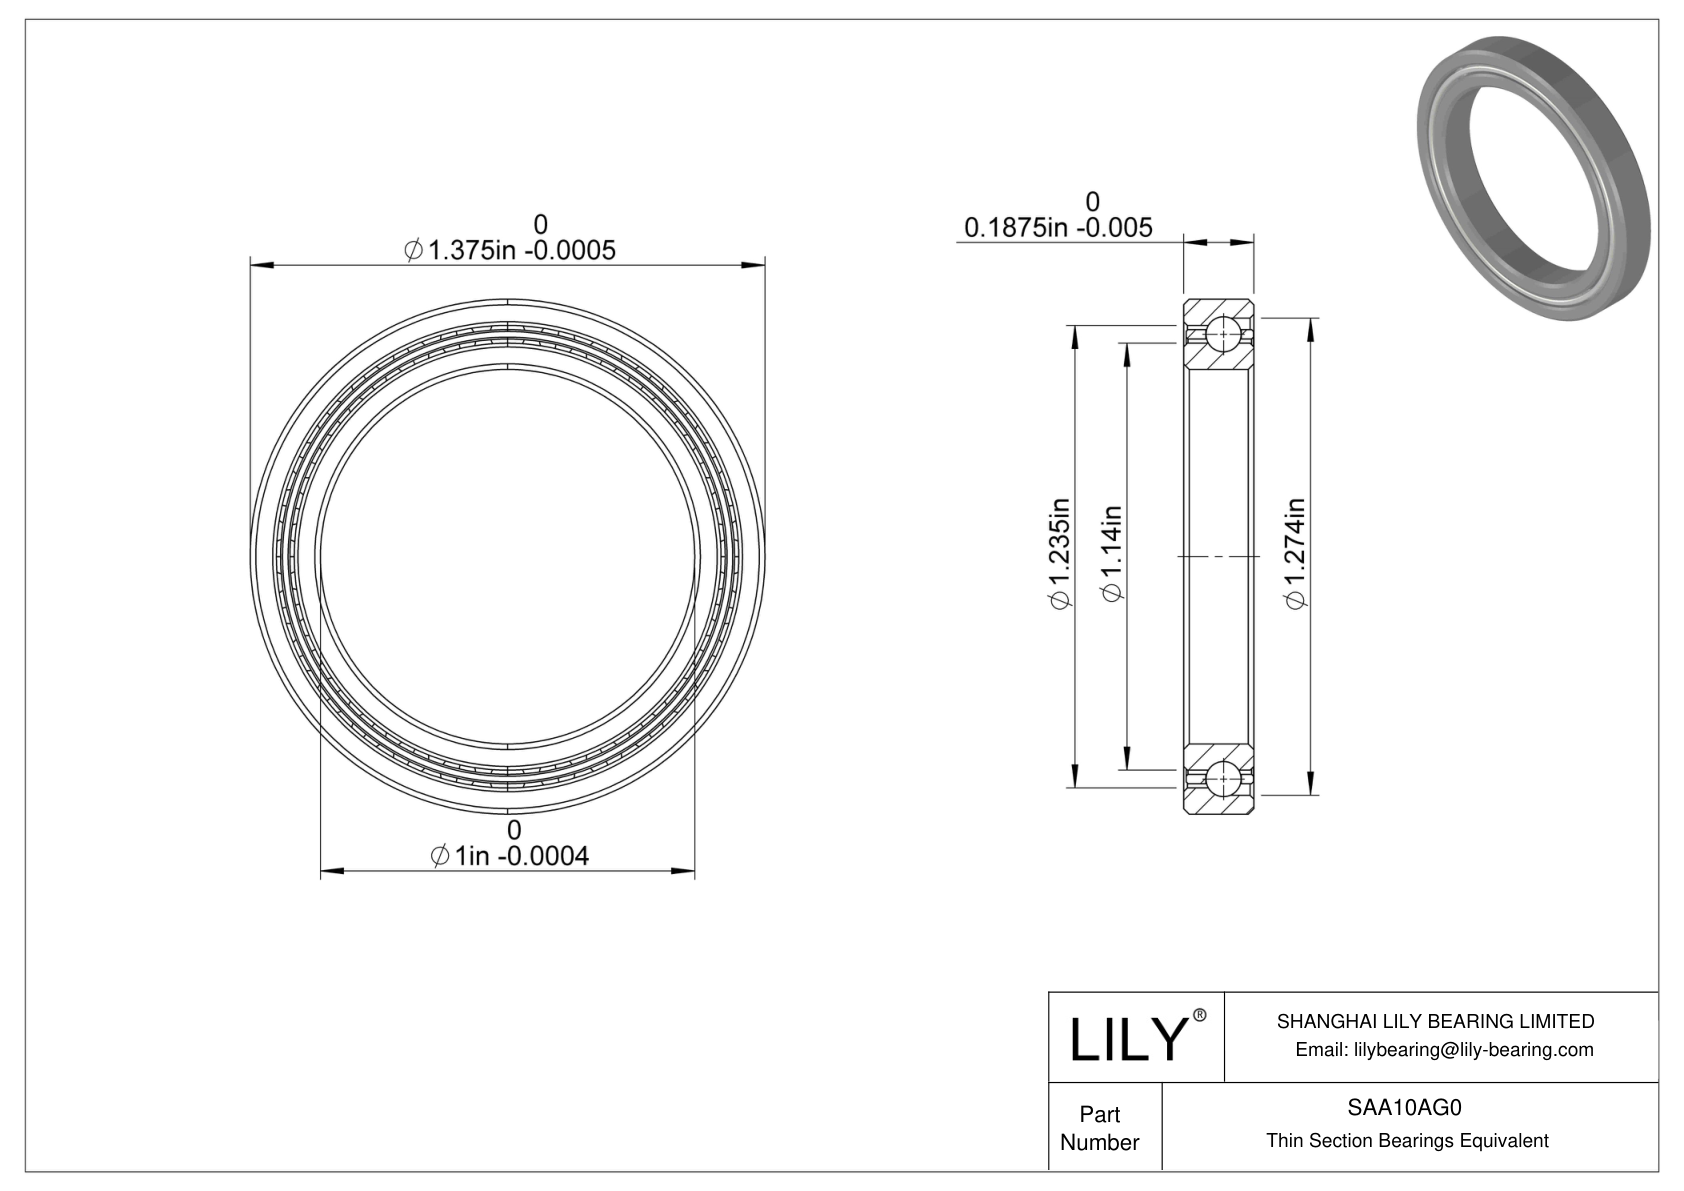 SAA10AG0 Constant Section (CS) Bearings CAD图形